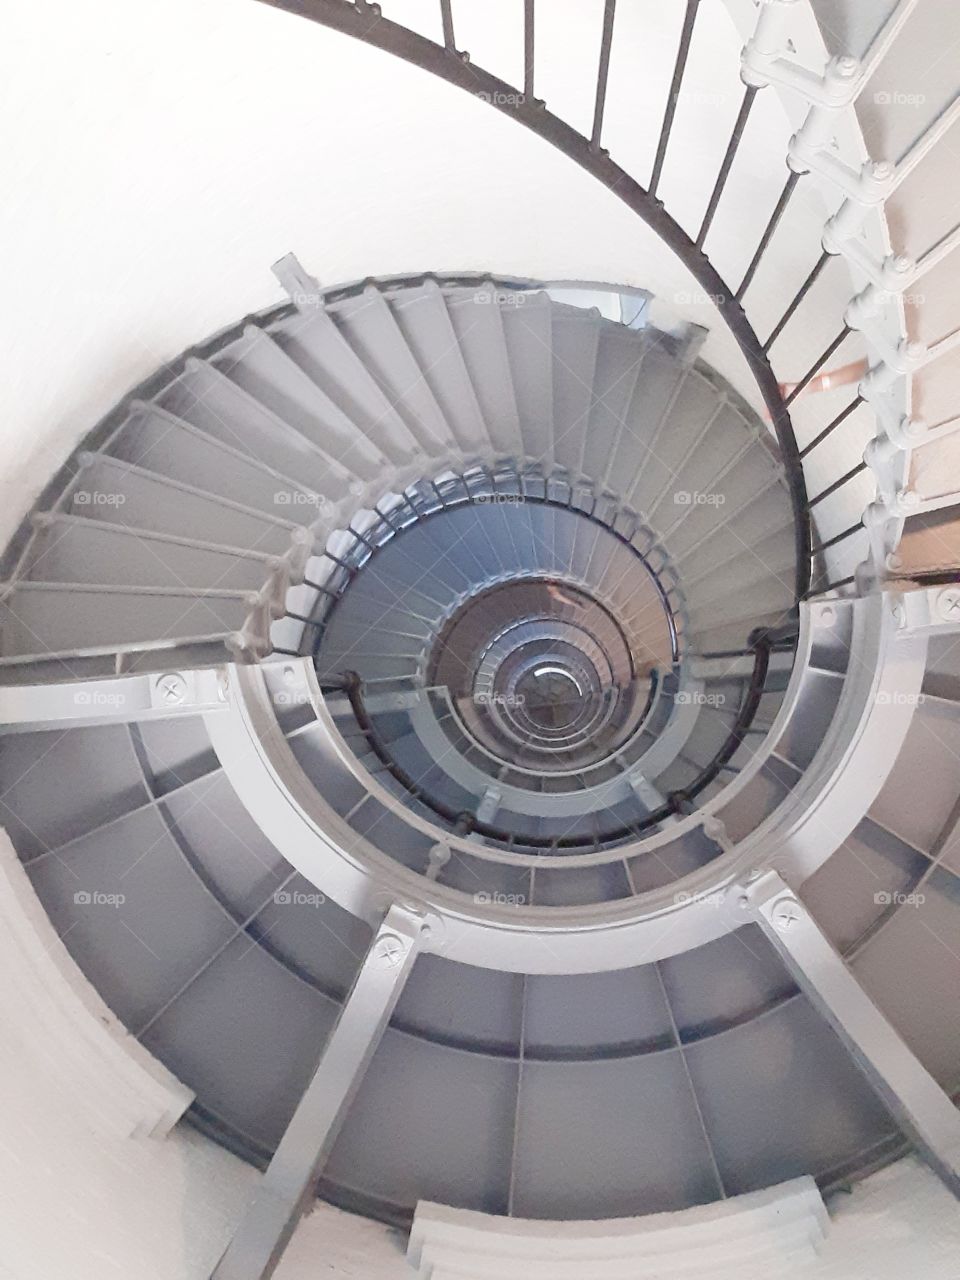 Photo of the spiral staircase from below of the Ponce Inlet Lighthouse in Ponce Inlet, Florida.